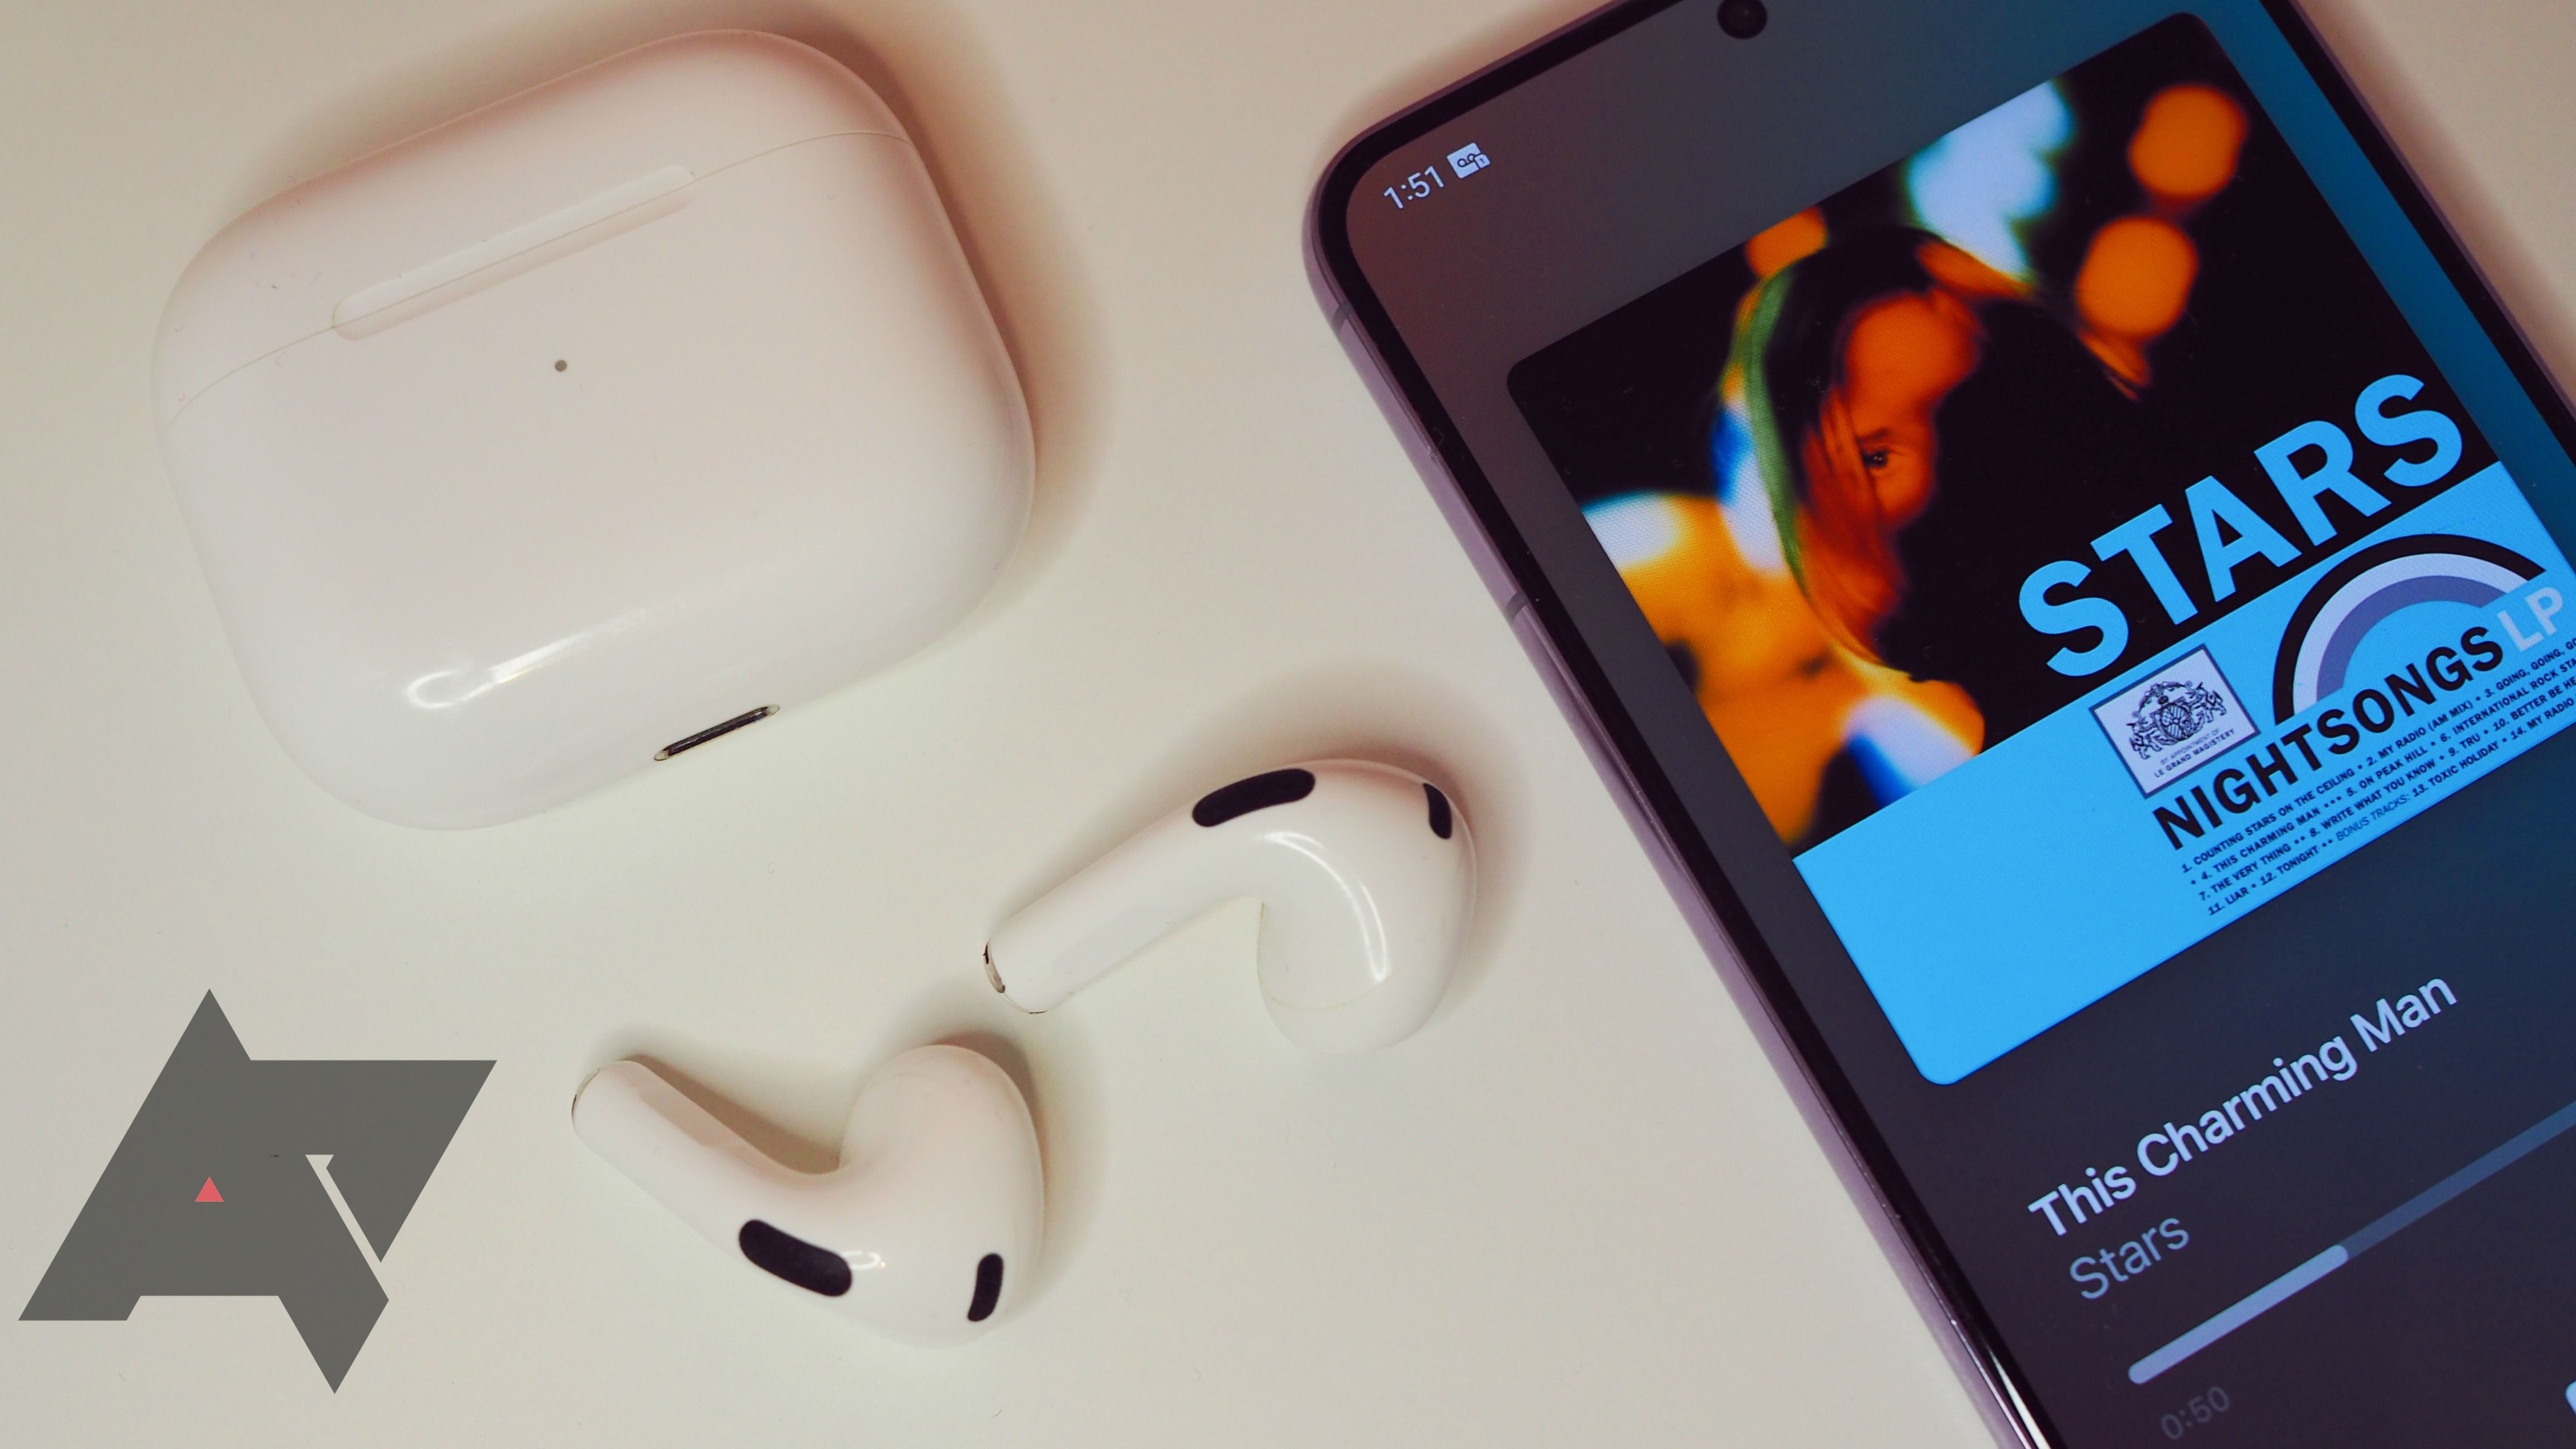 airpods with case lying next to android phone